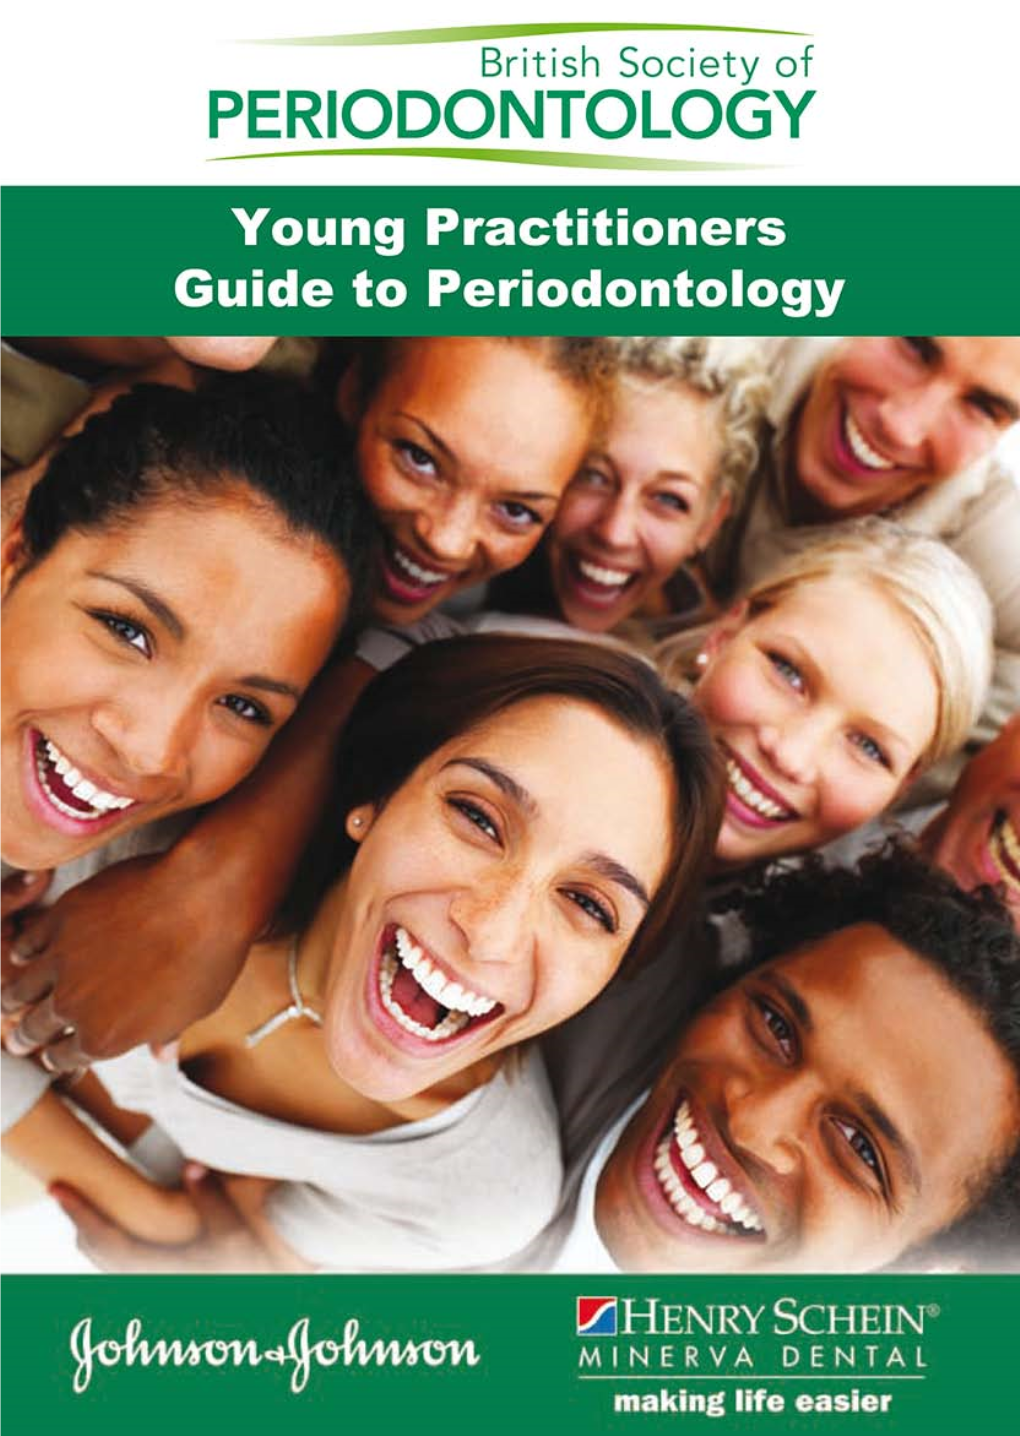 Guide to Manage Periodontal Disease